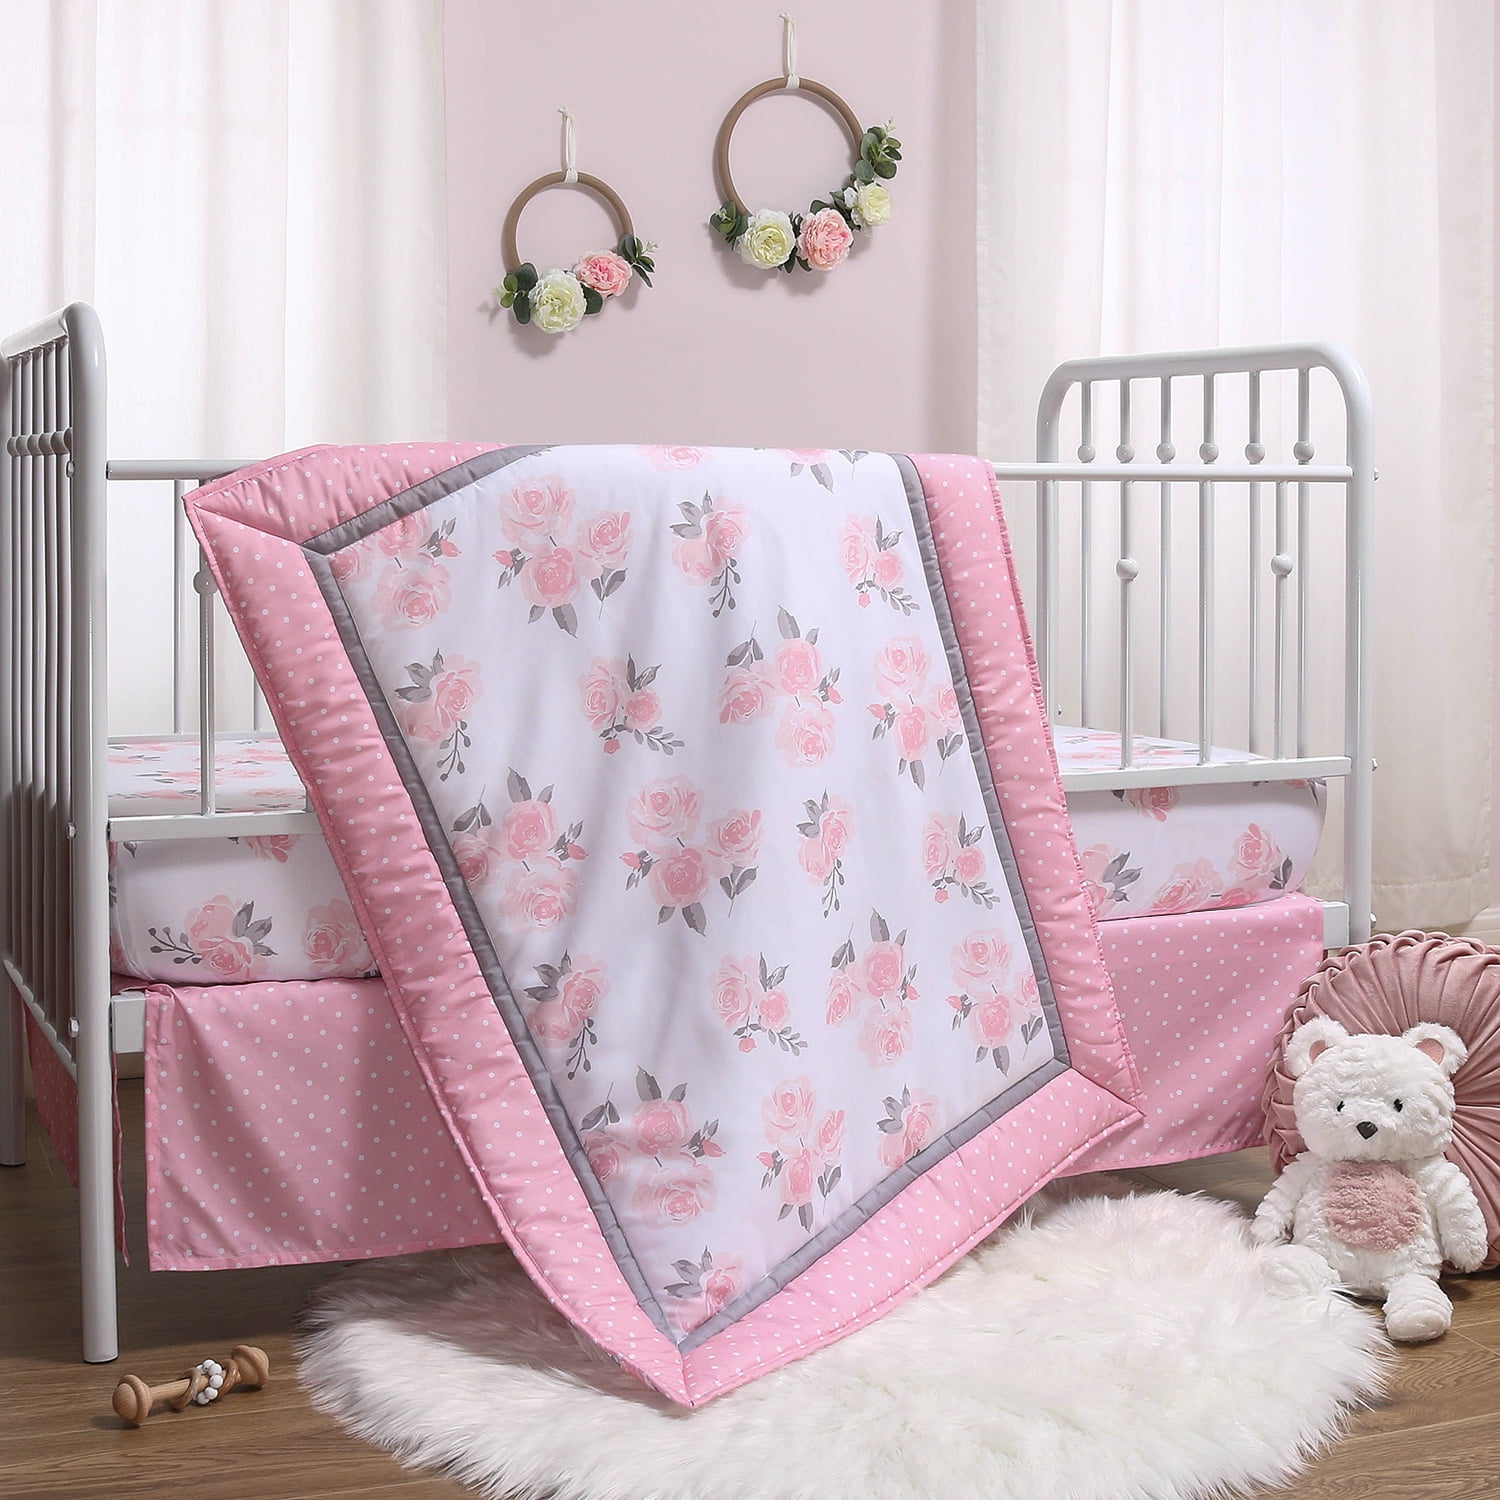 BABY BEDDING SET LUXURY 3 PIECES NURSERY BUMPER-PILLOW-QUILT COVER to fit COT 